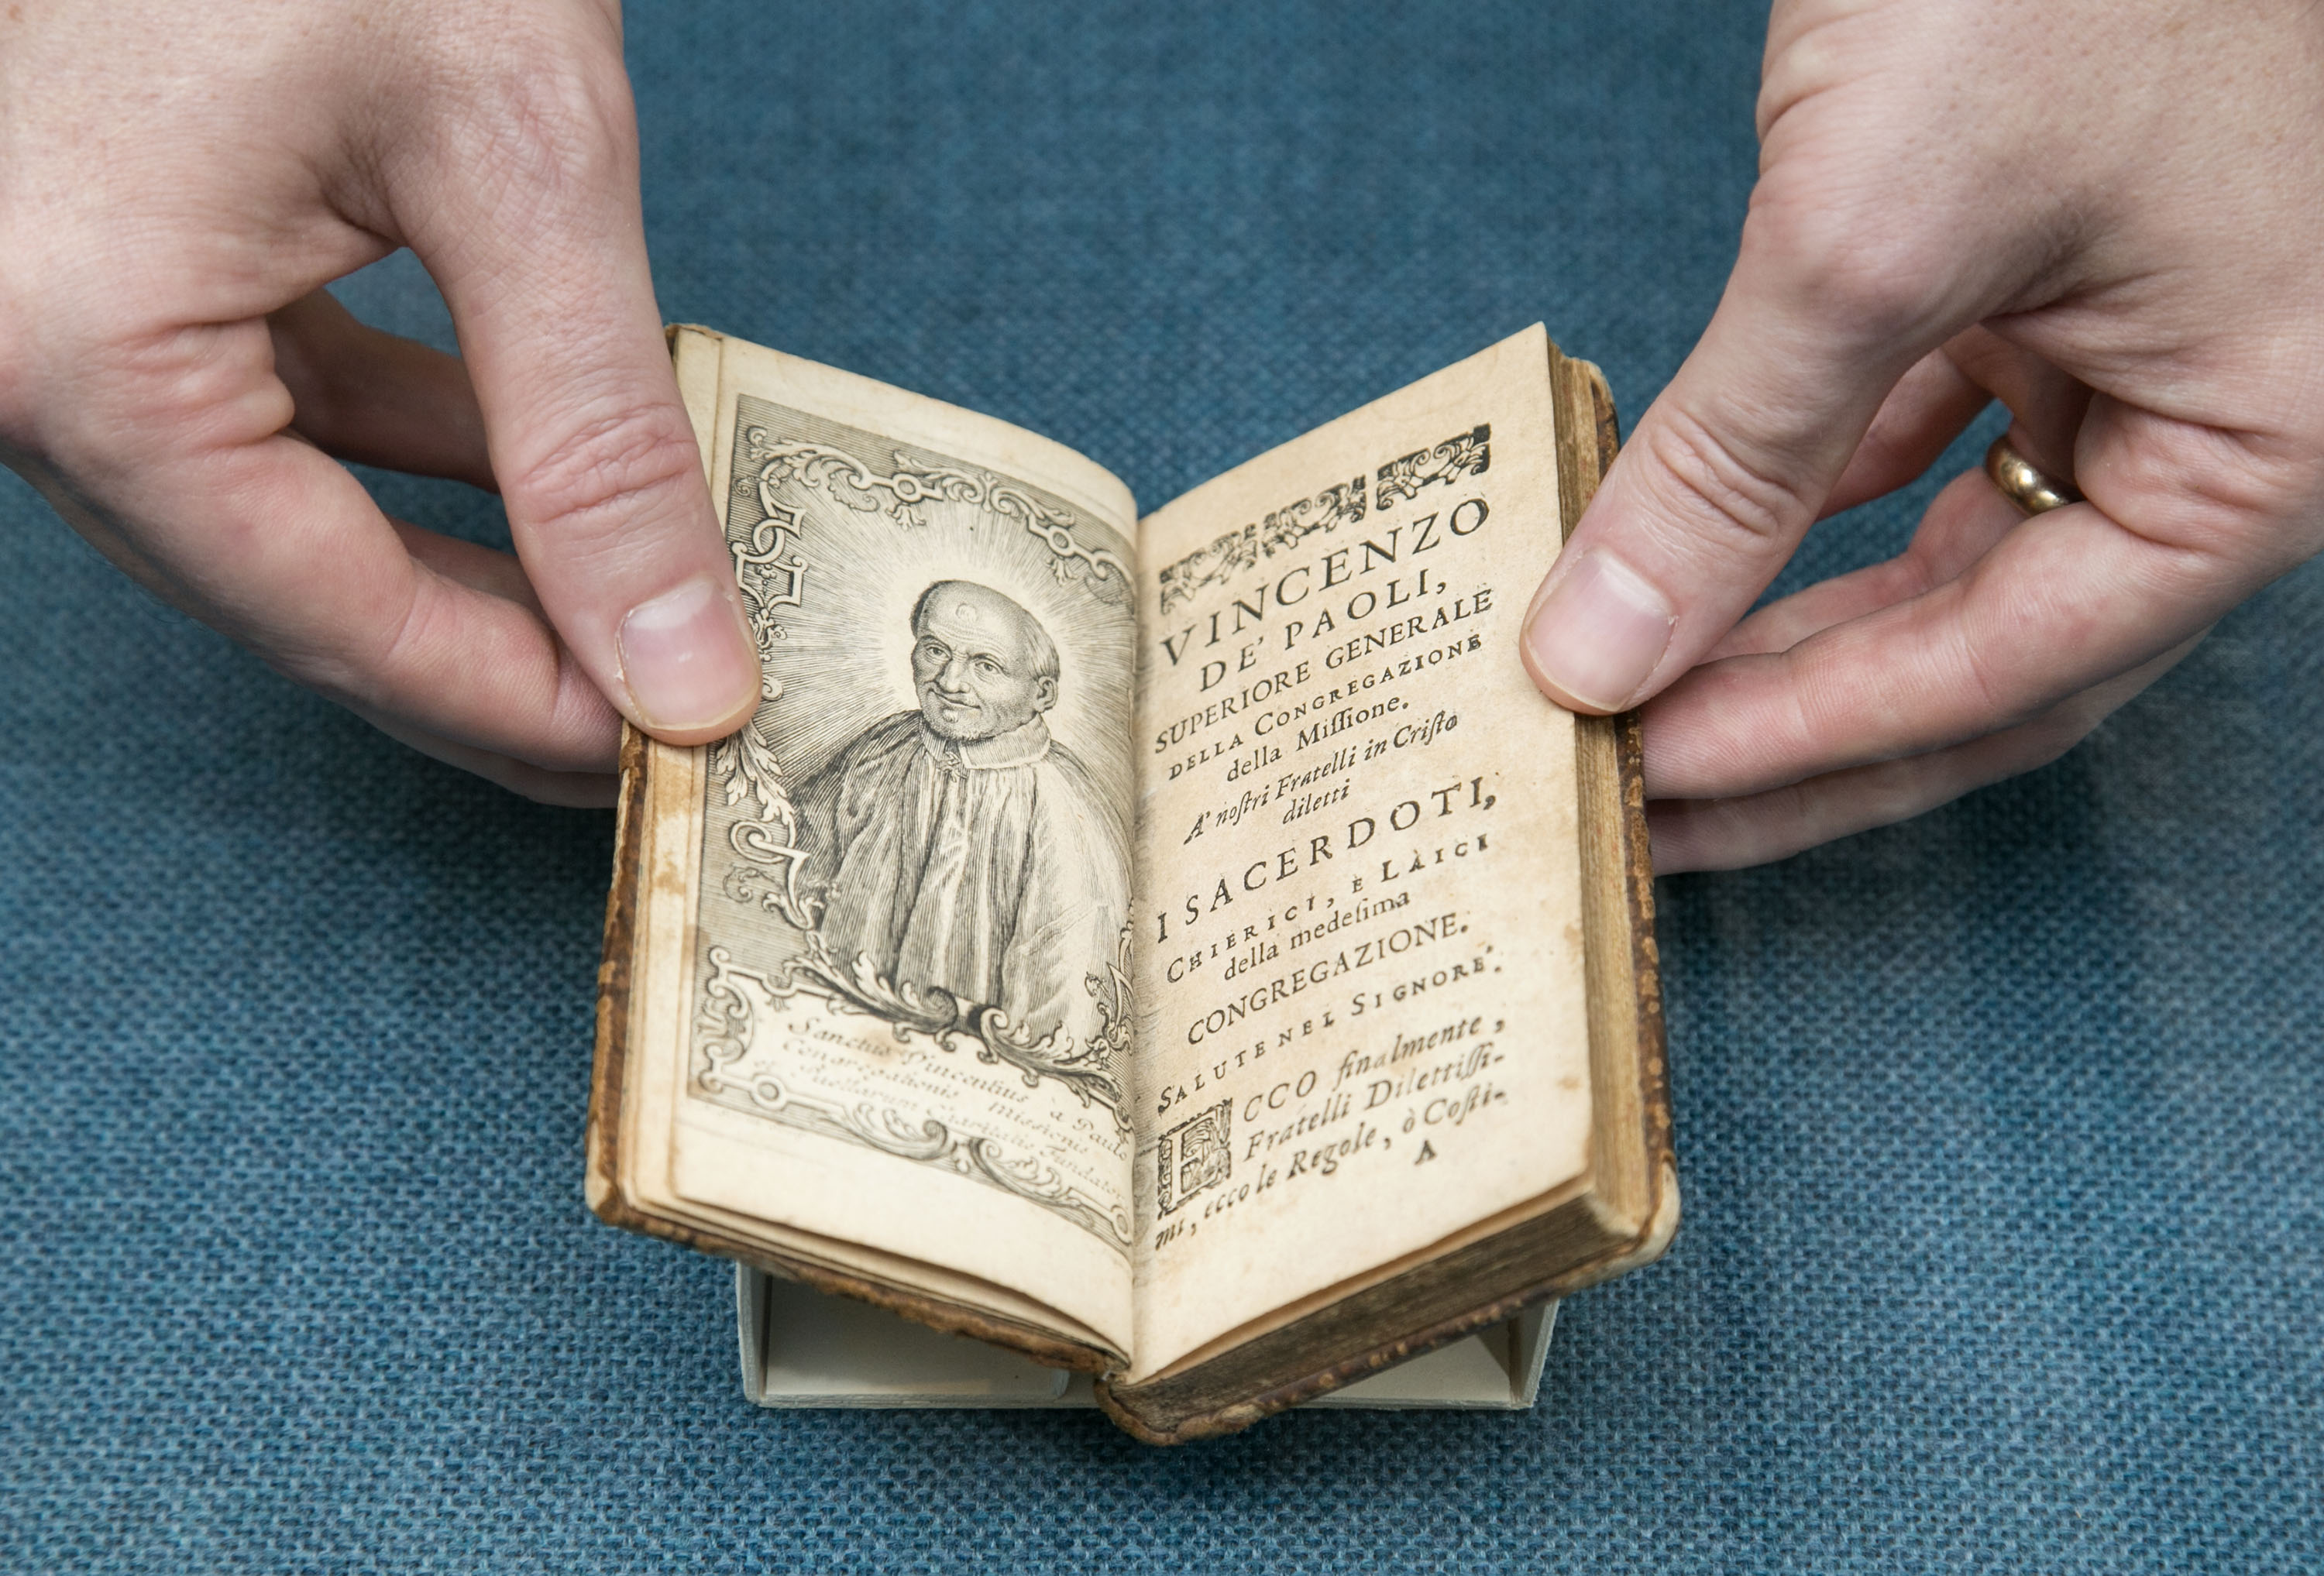 After Vincent de Paul founded his Congregation of the Mission in 1625, he codified rules by which the community was governed and directed. These rules were eventually printed in 1658, two years prior to Vincent’s death, and distributed amongst his colleagues. This pocket-sized copy, which is in Italian, will be on display at the exhibition. (DePaul University/Jamie Moncrief)